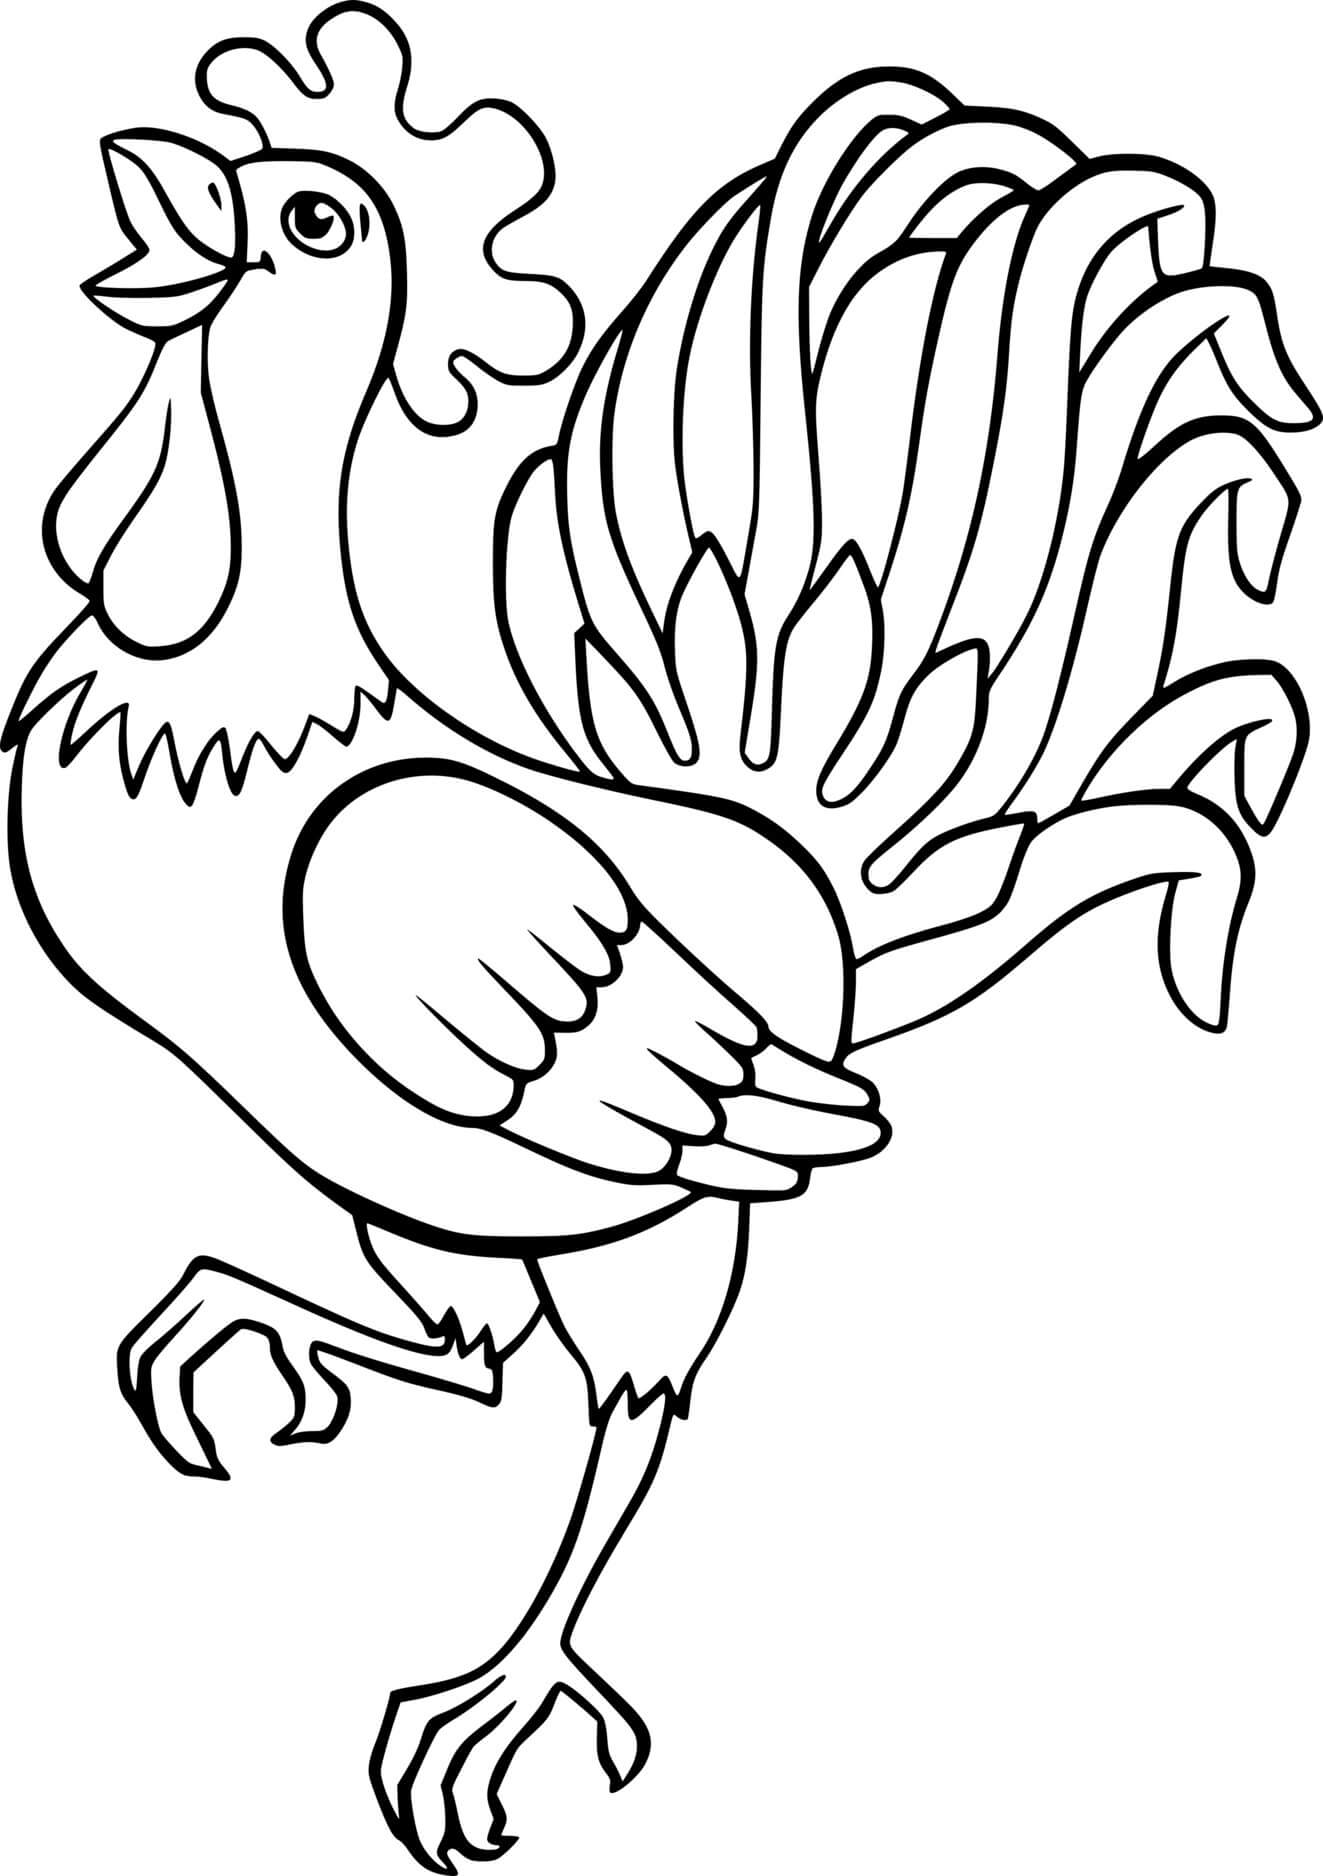 Simple Crowing Rooster Coloring Page